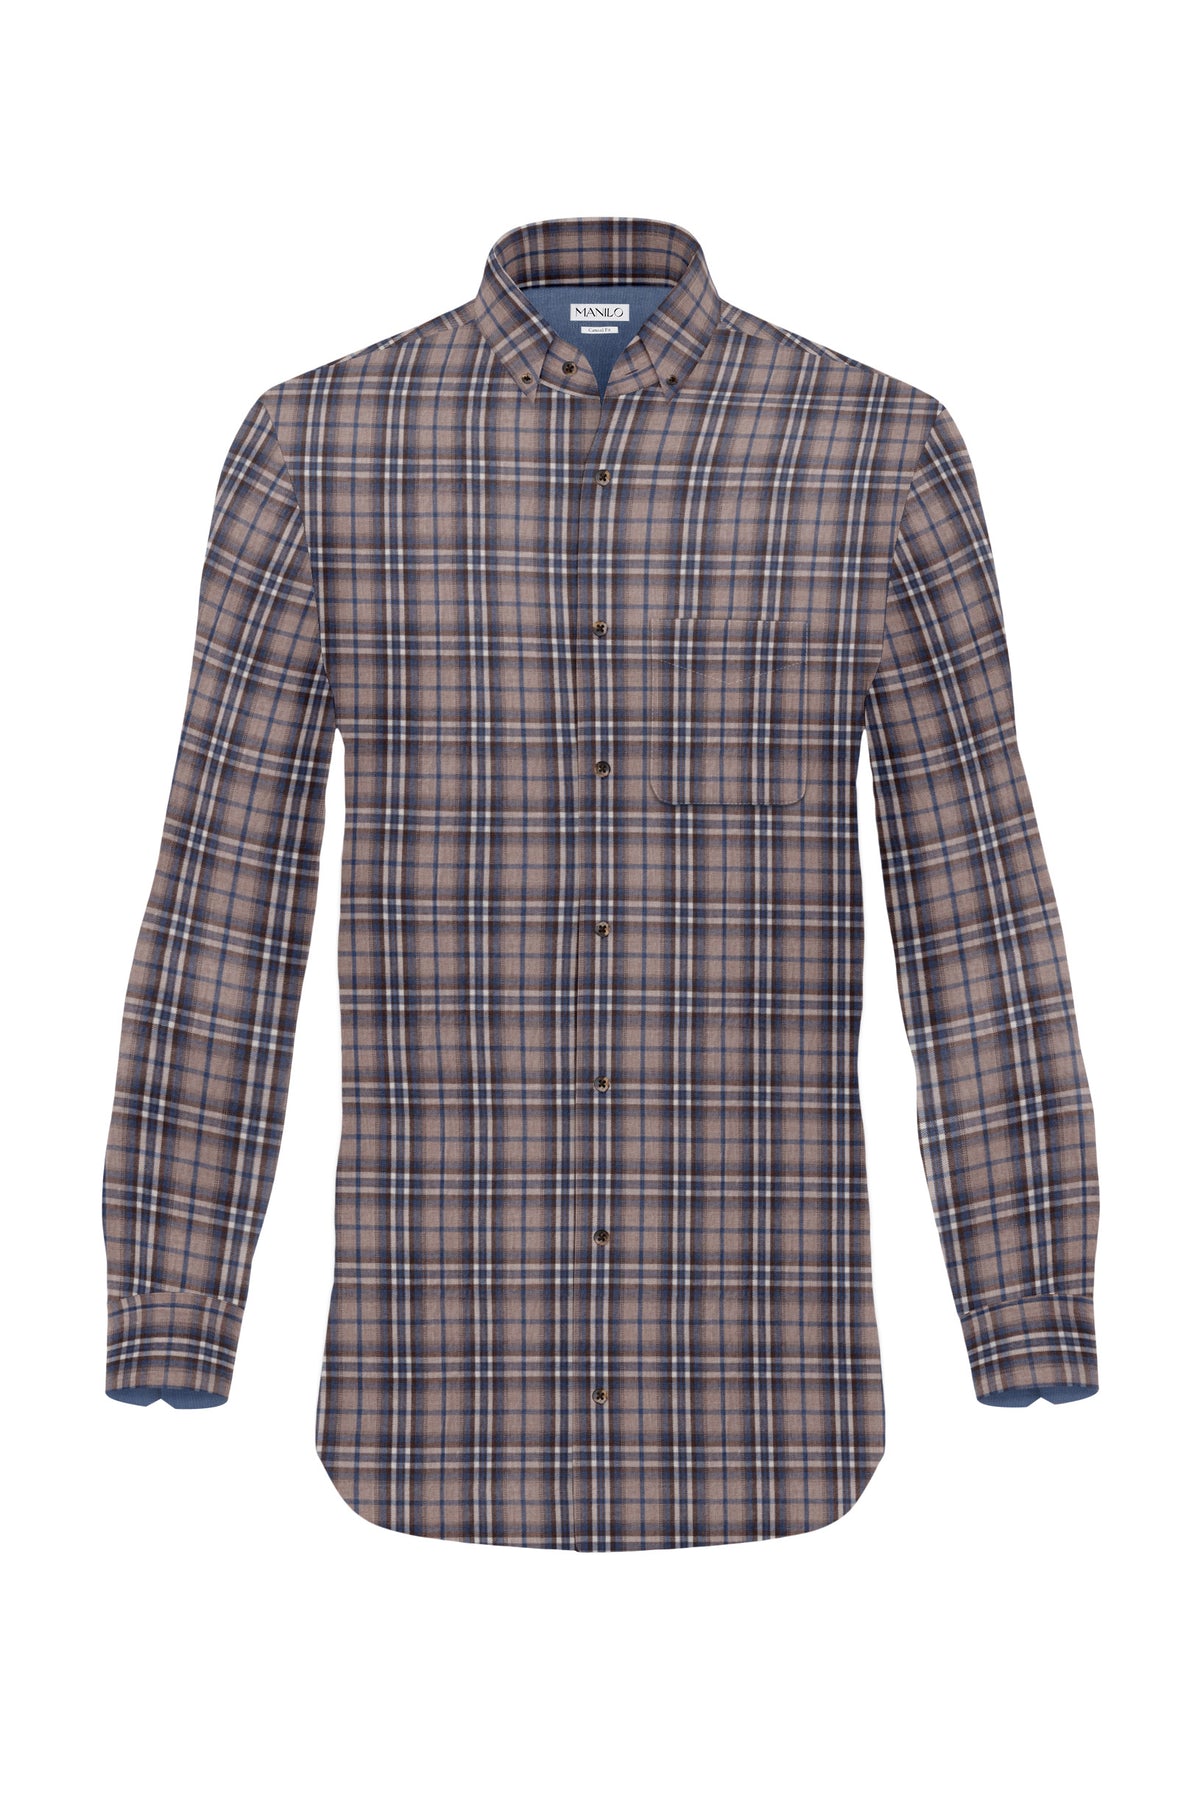 Flannel shirt with check pattern in beige (Art. 2133-C)